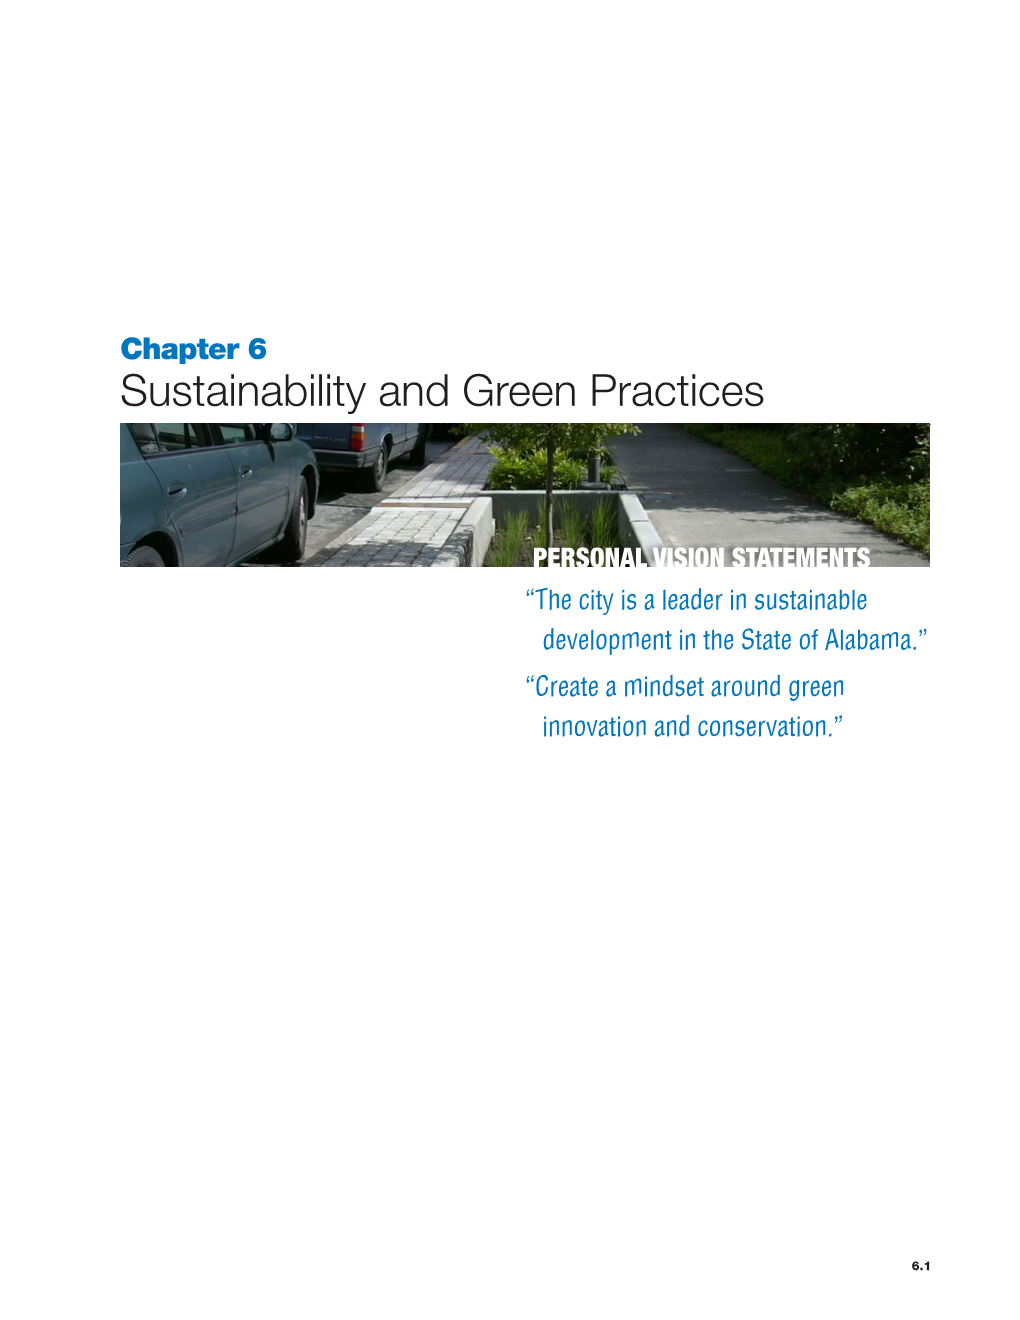 Chapter 6 – Sustainability and Green Practices